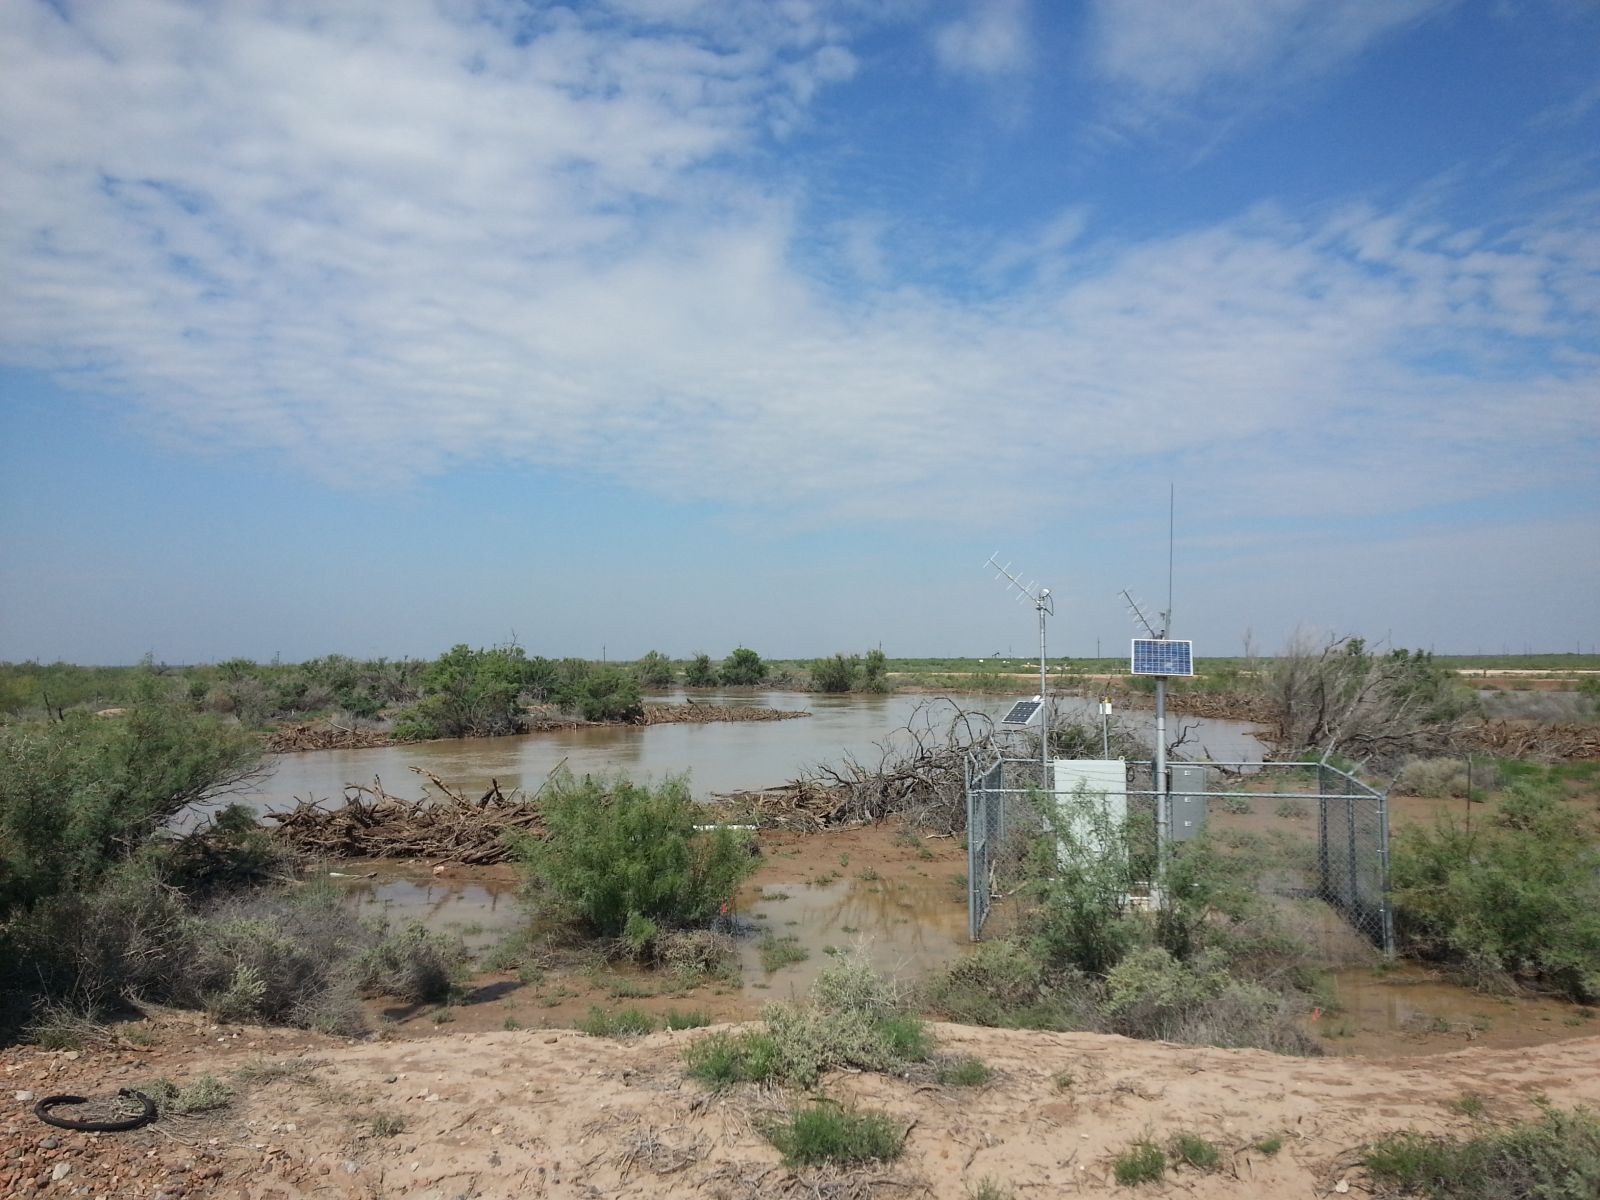 Several views of the swelling Pecos River between Red Bluff Reservoir and the town of Pecos on September 24, 2014.